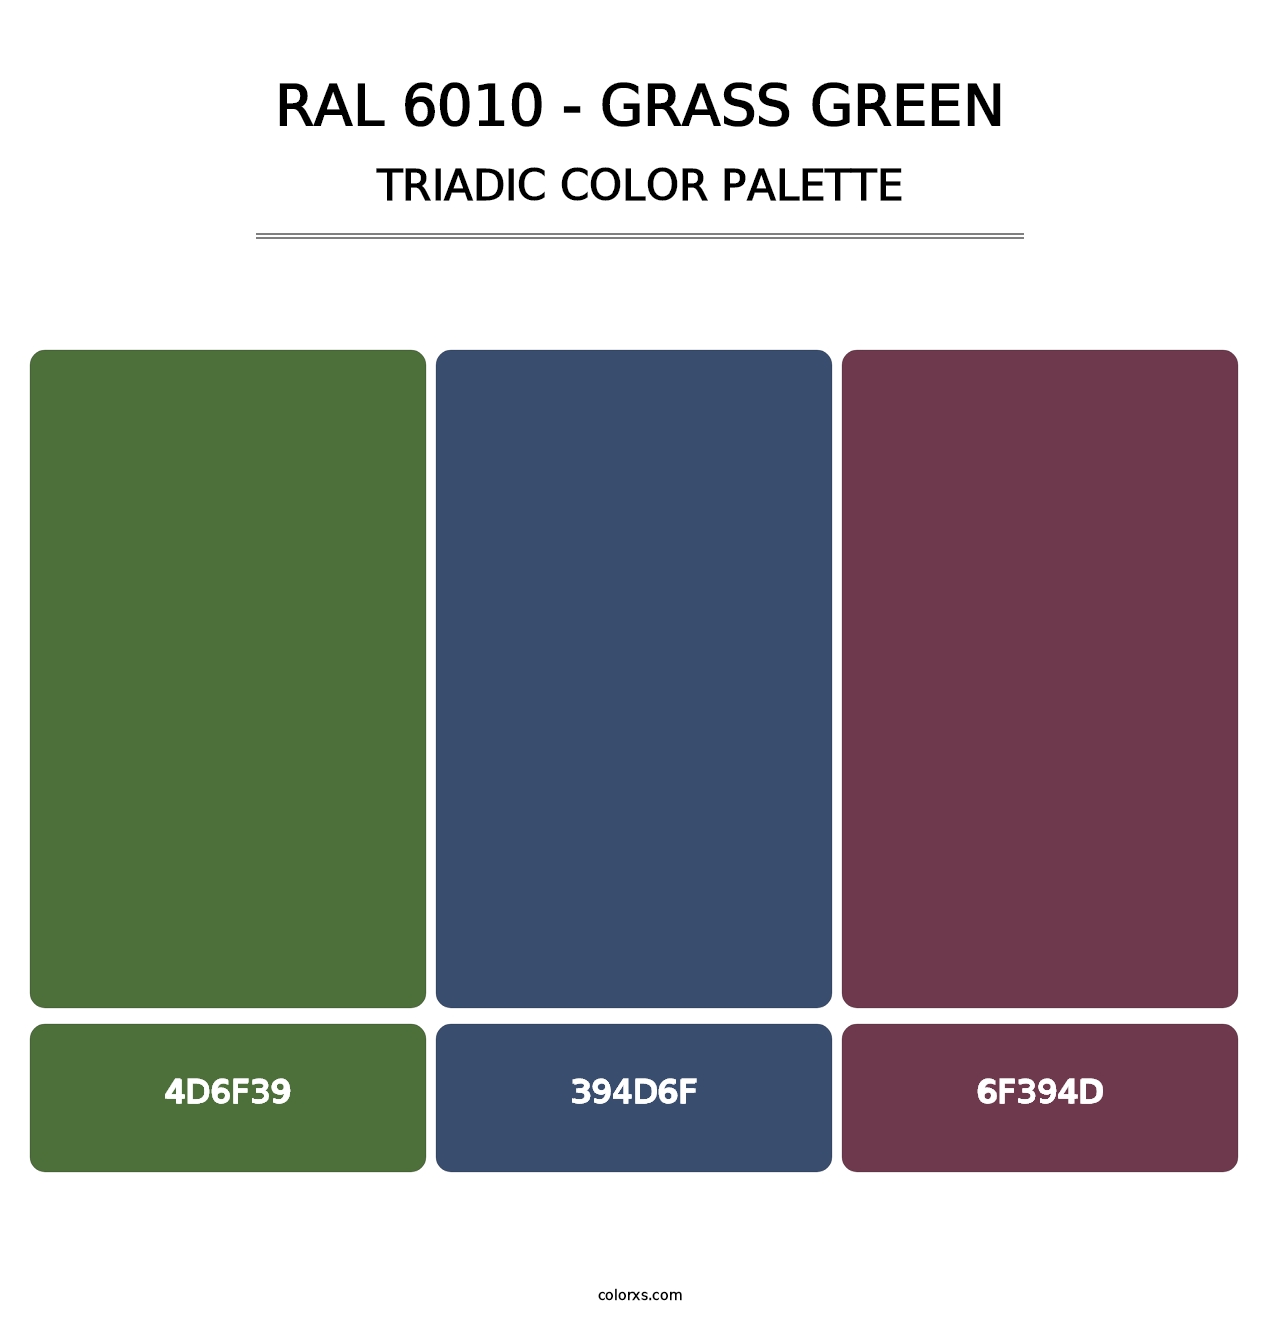 RAL 6010 - Grass Green - Triadic Color Palette